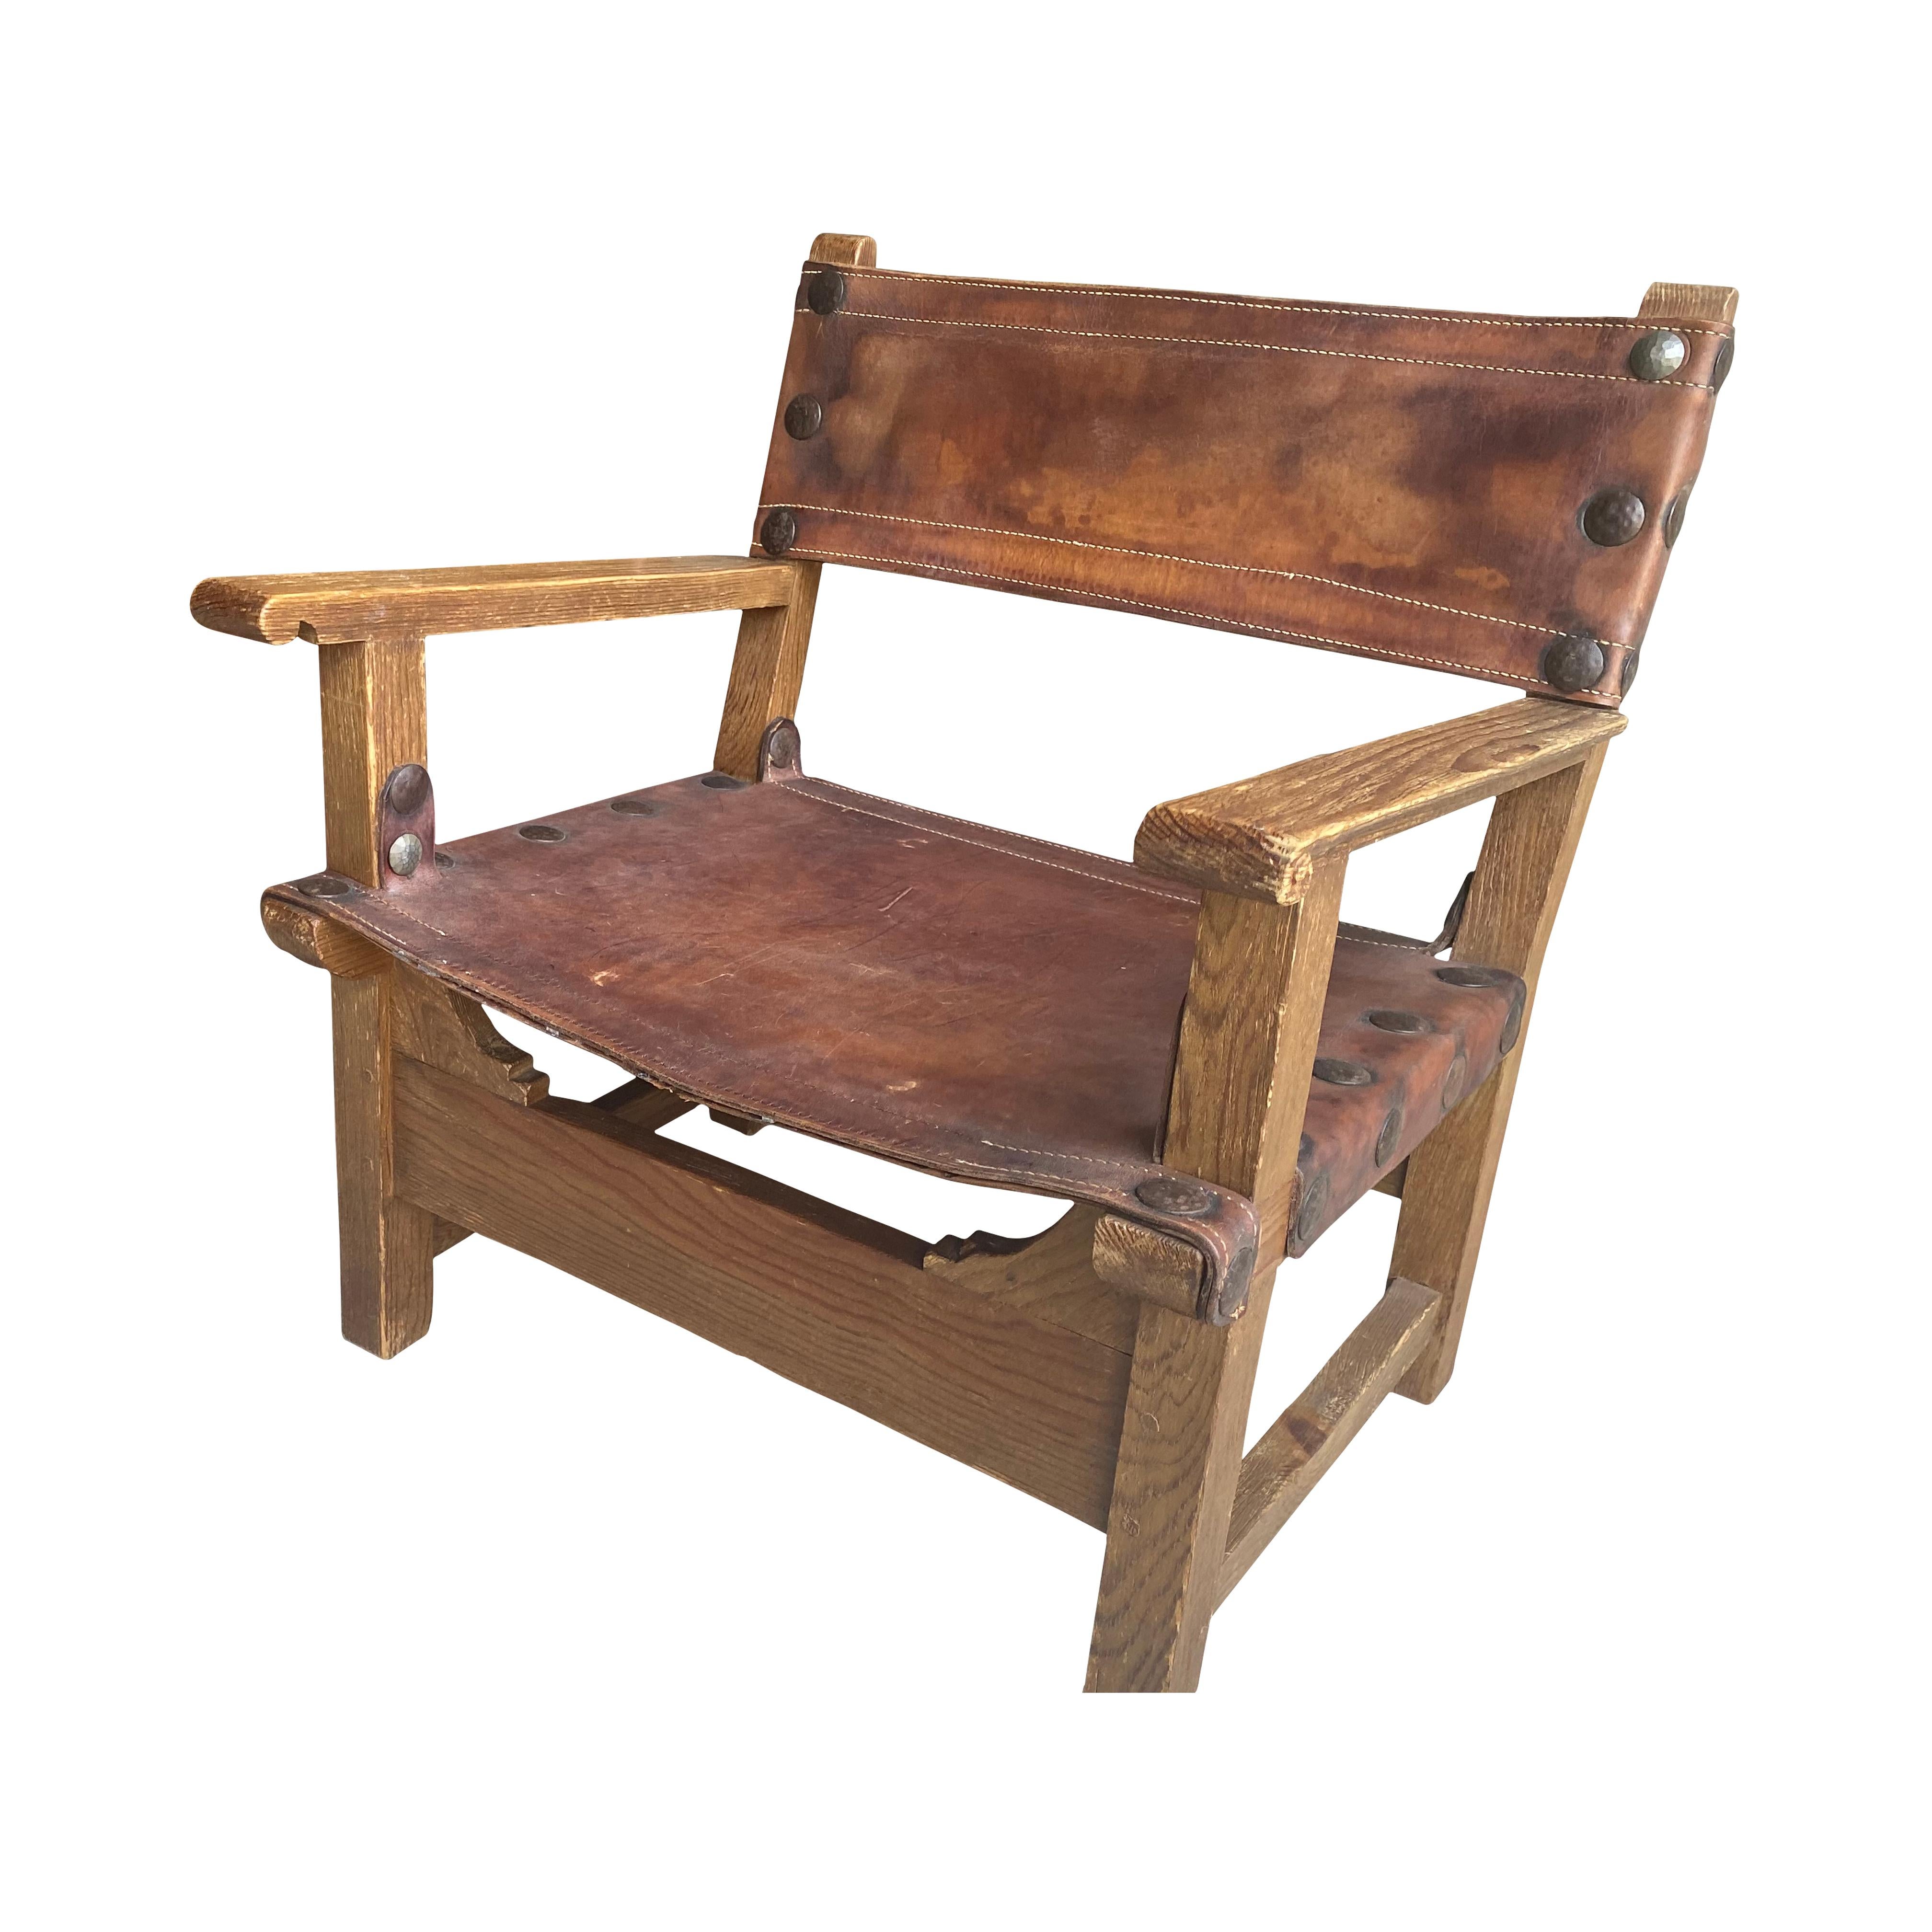 French oak and leather sling chair, typical of the chateau or chalet style from midcentury residences in the French Alps. Fantastic oversized nail heads and patina on leather add character. Two available, sold separately.